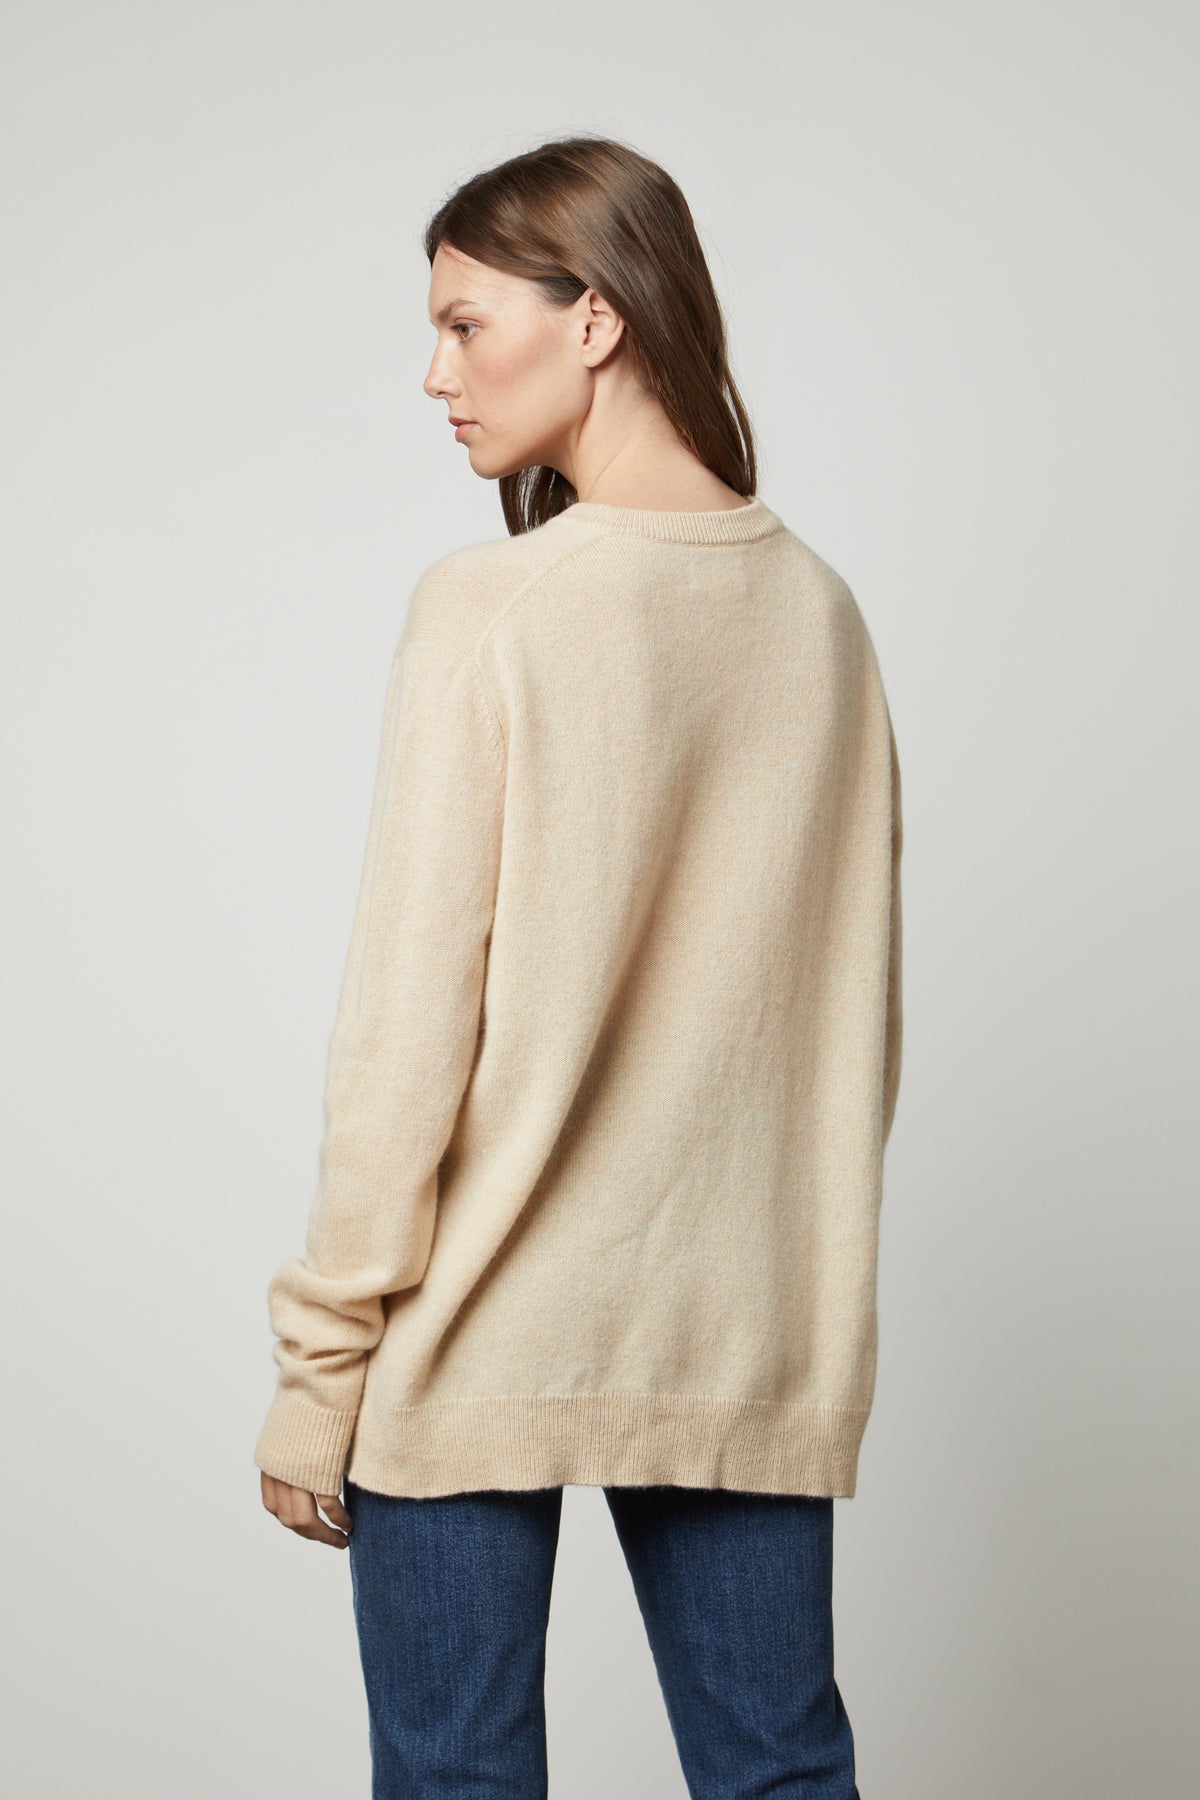 The view of a woman wearing an oversized Velvet by Graham & Spencer Harmony Cashmere V-Neck Sweater.-35655722795201